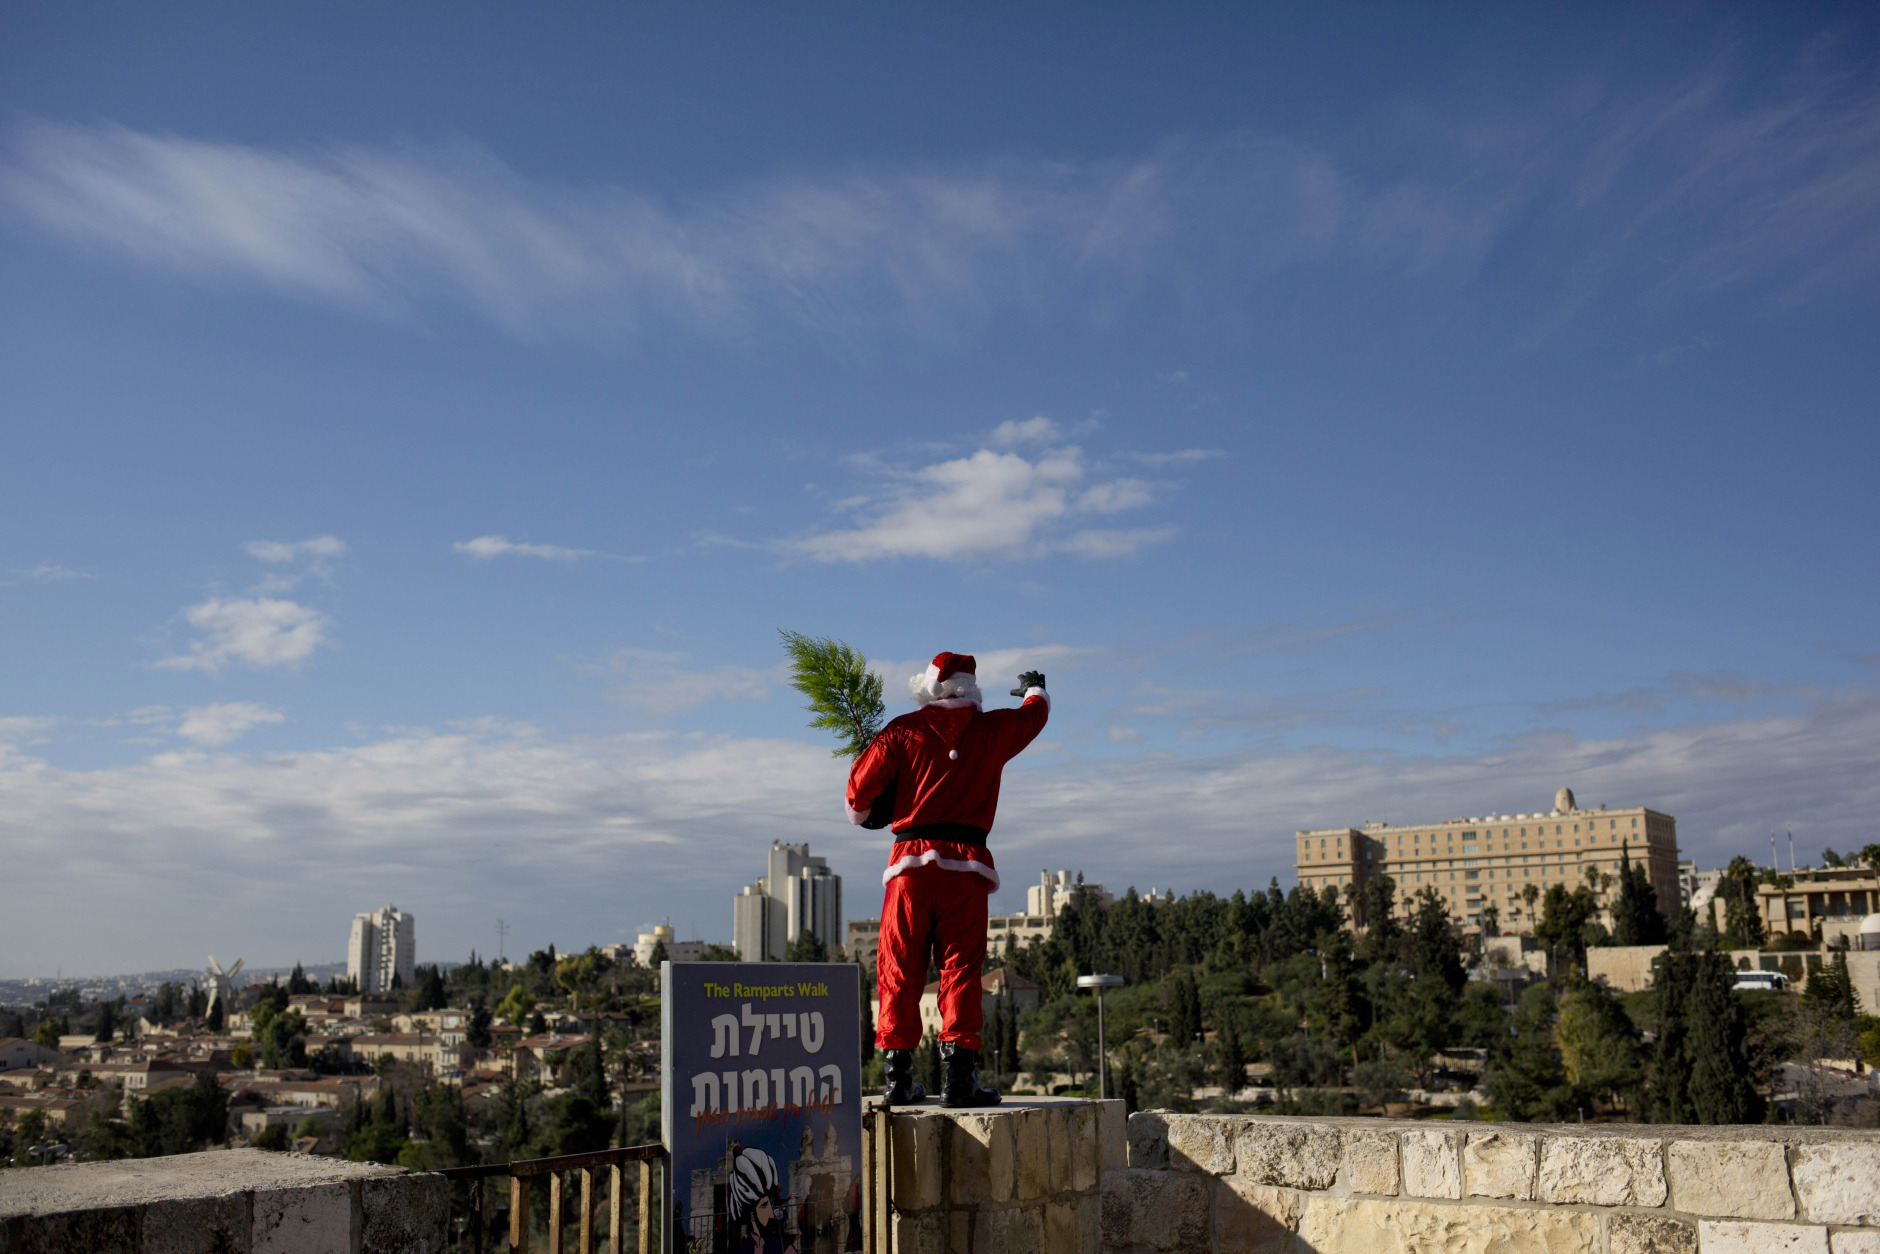 A man dressed as Santa Claus stands on the wall of the Old City in Jerusalem Monday, Dec. 22, 2014. (AP Photo/Dusan Vranic)